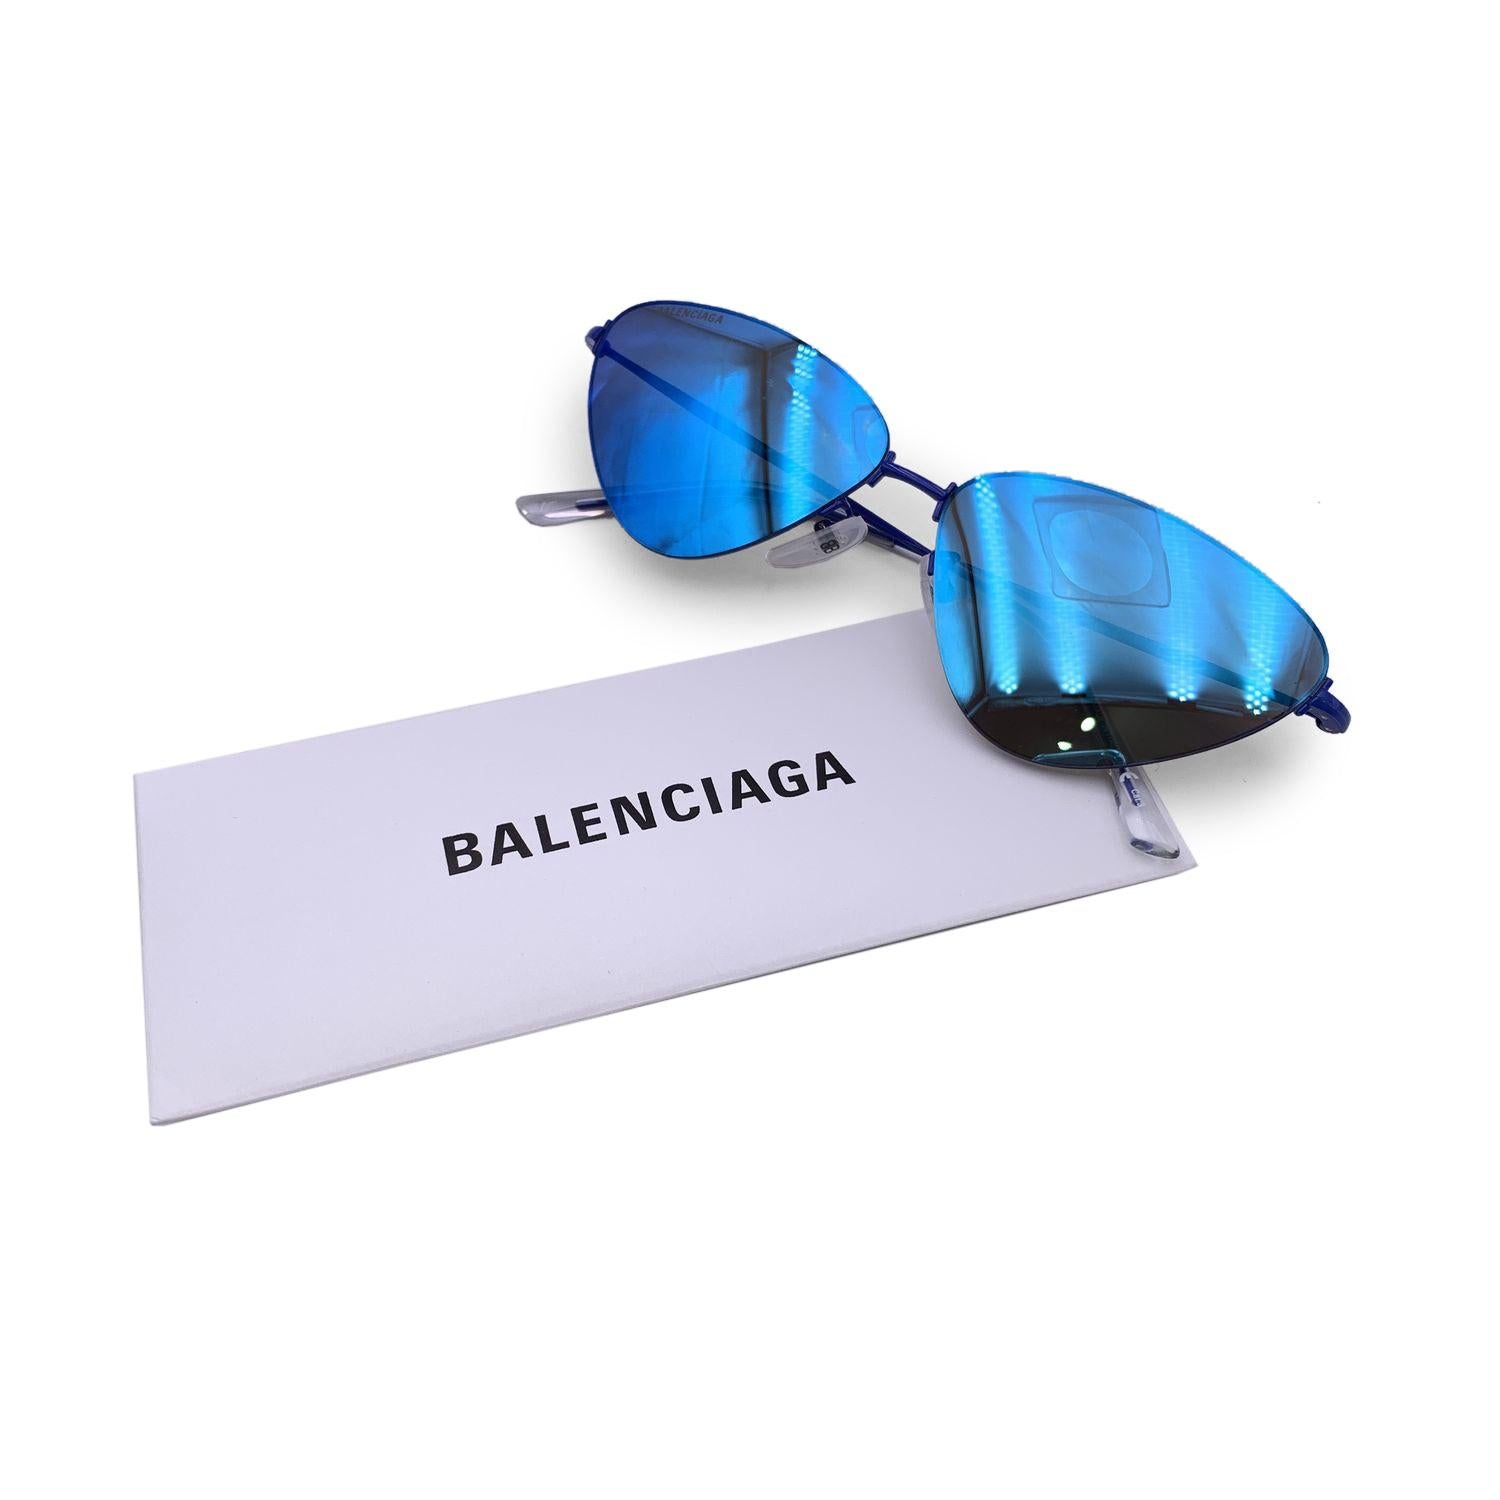 Balenciaga Sunglasses Model BB0105S - 003. Blue metal frame. Cat-eye design. Mirrored lenses. Mod & refs: BB0105S - 003 - 61/12 - 145. Made in Italy Details MATERIAL: Metal COLOR: Blue MODEL: BB0105S GENDER: Women COUNTRY OF MANUFACTURE: Italy